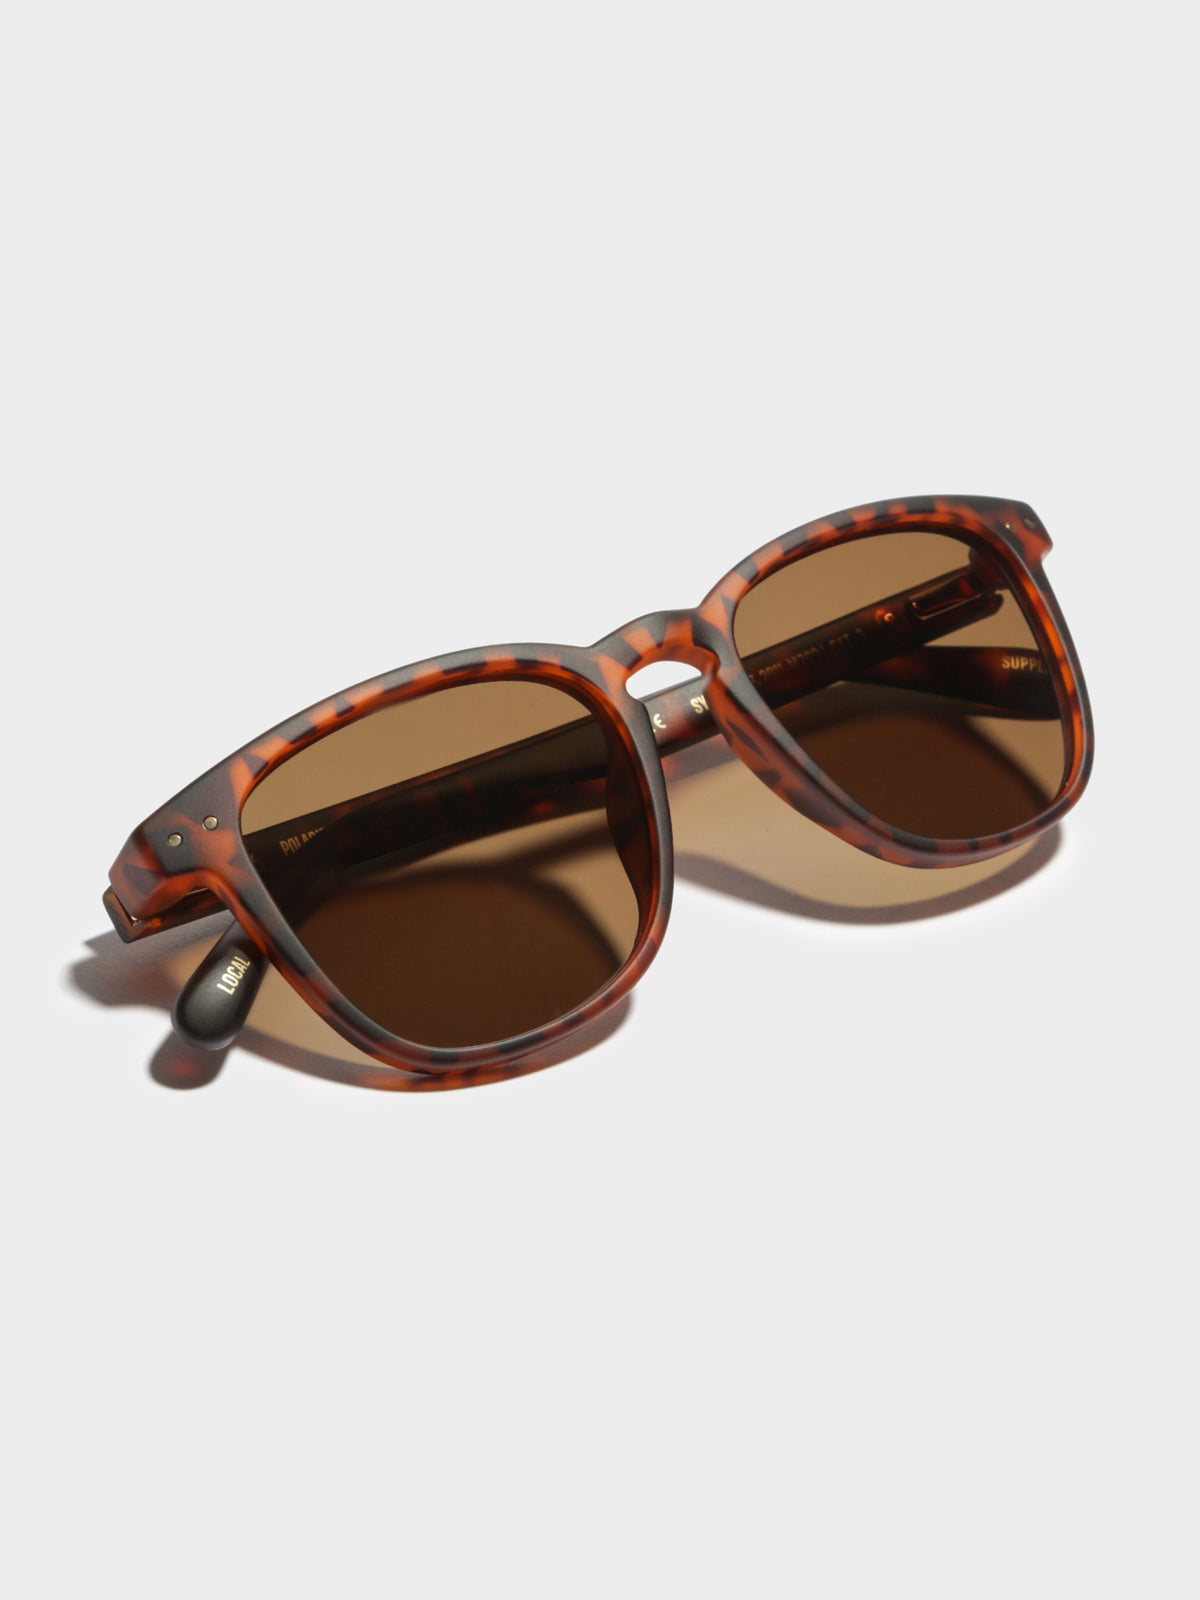 SYD Polarized Sunglasses in Tortoise Shell Brown